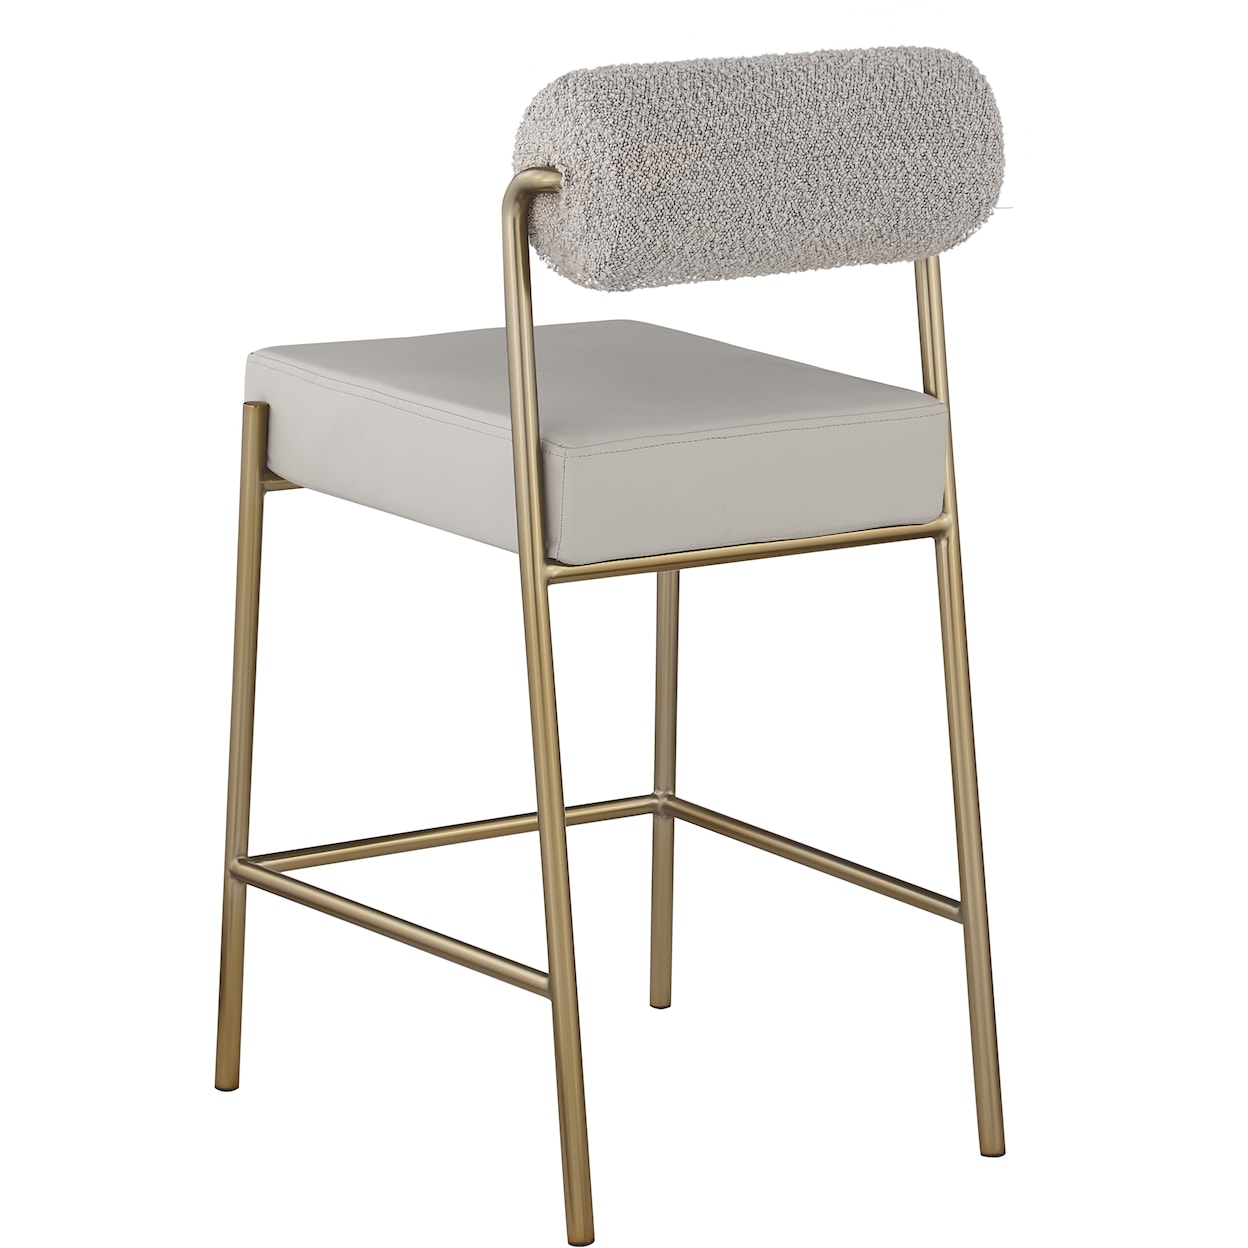 Meridian Furniture Carly Counter Stool